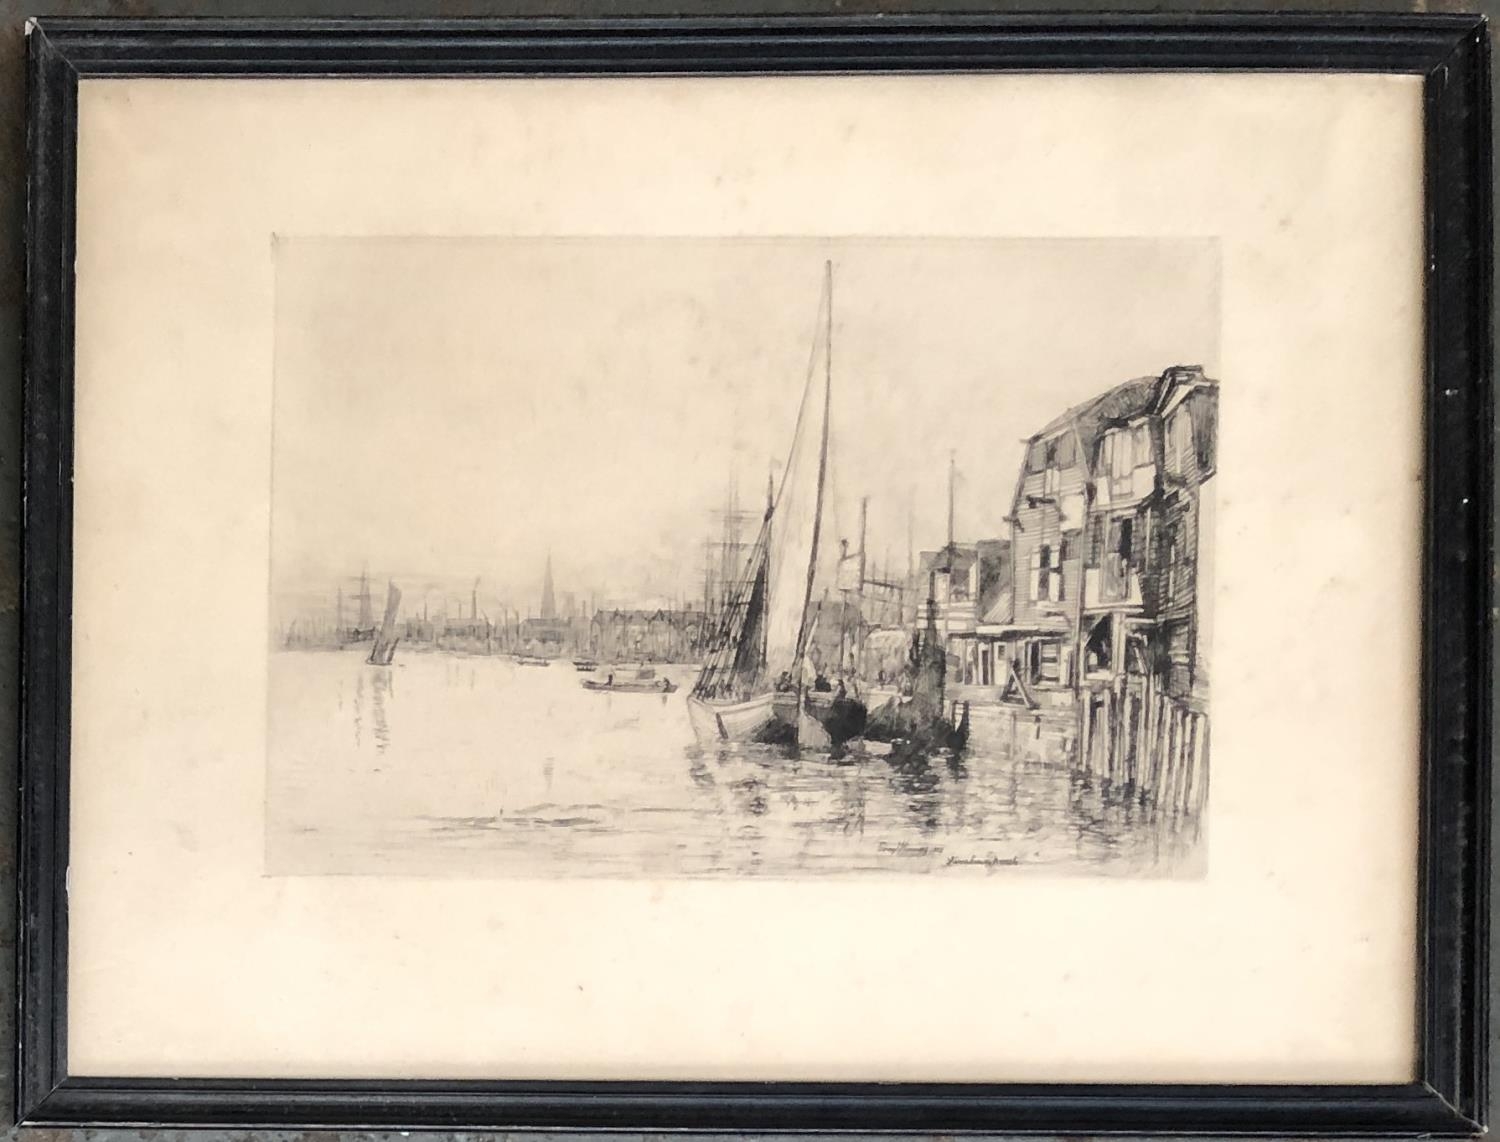 Percy Thomas, 'Limehouse Reach', drypoint etching, signed and dated 1889 within the plate, 16x24cm